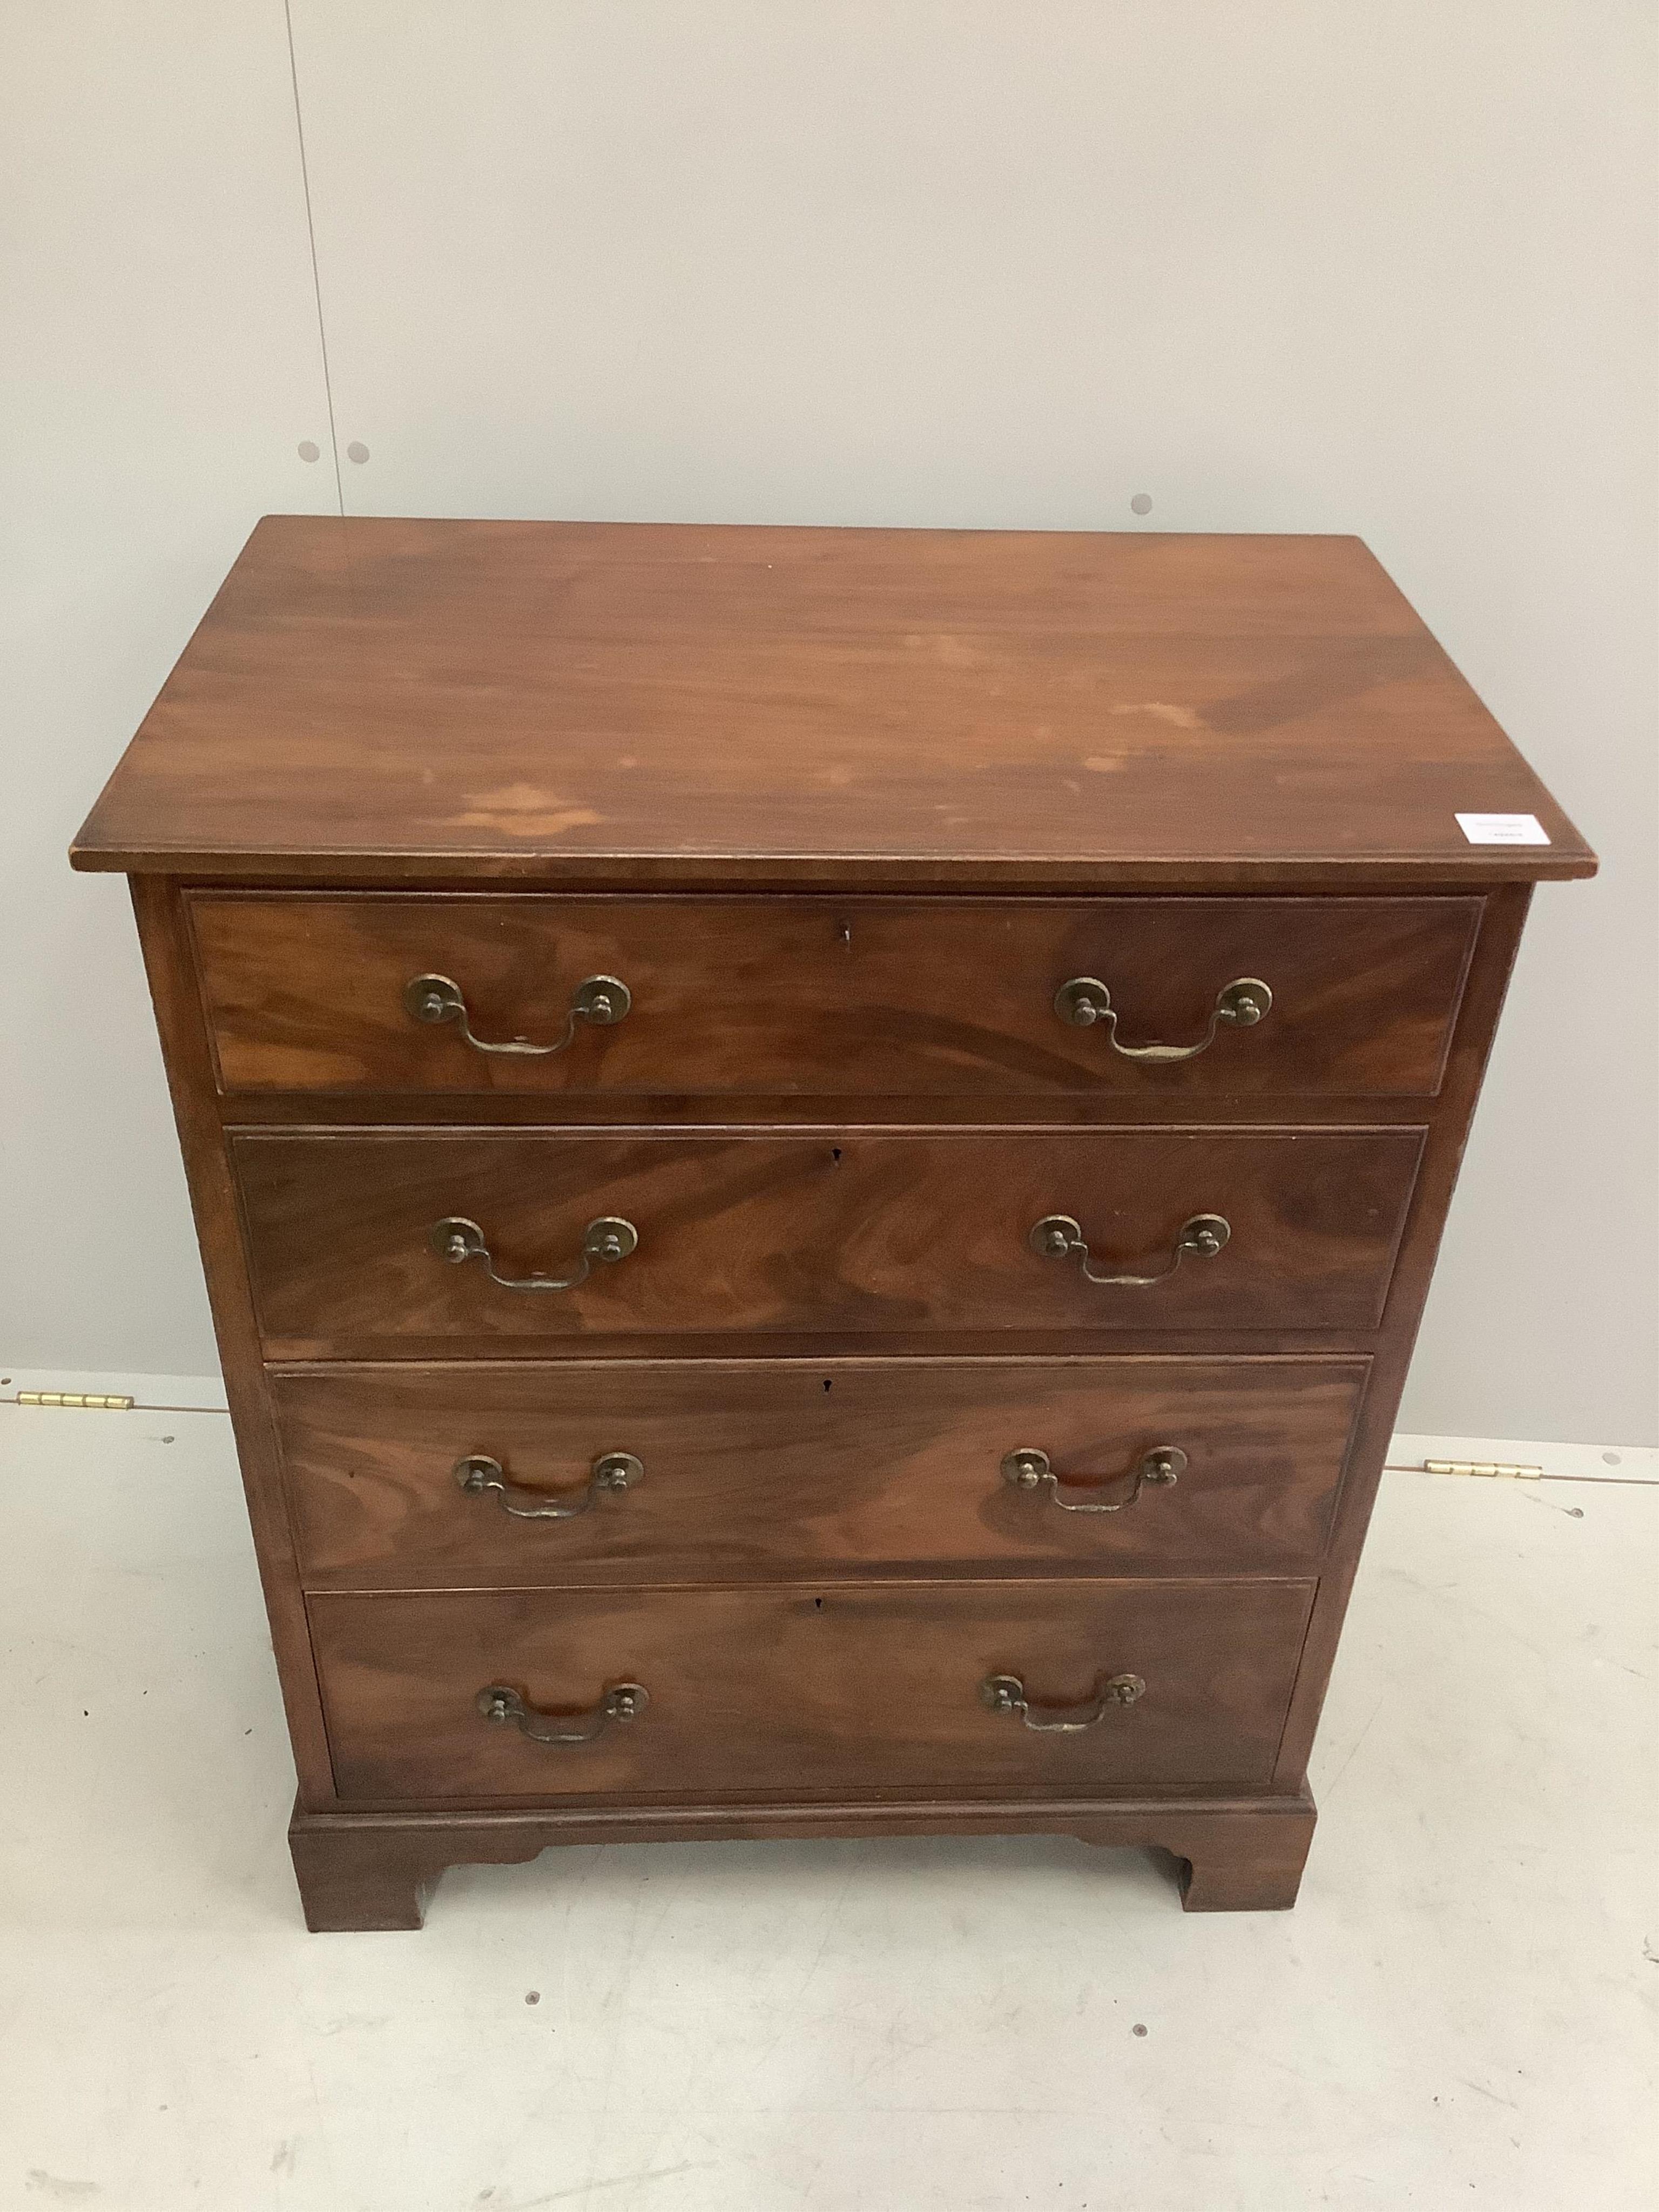 A George III style mahogany chest of four drawers, width 75cm, depth 47cm, height 90cm. Condition - fair